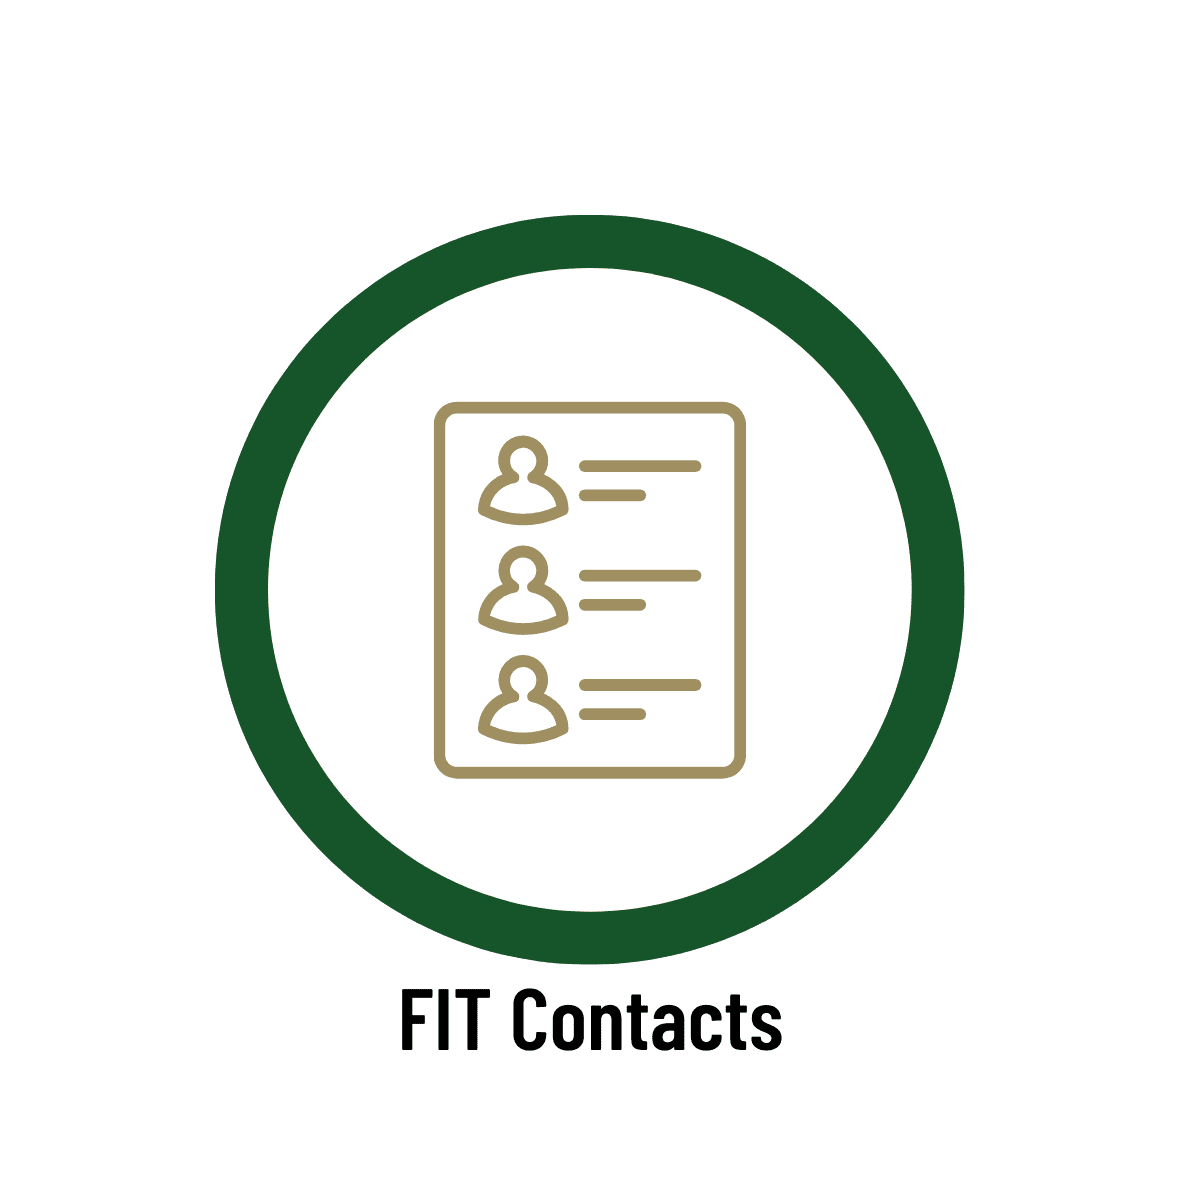 FIT Contacts